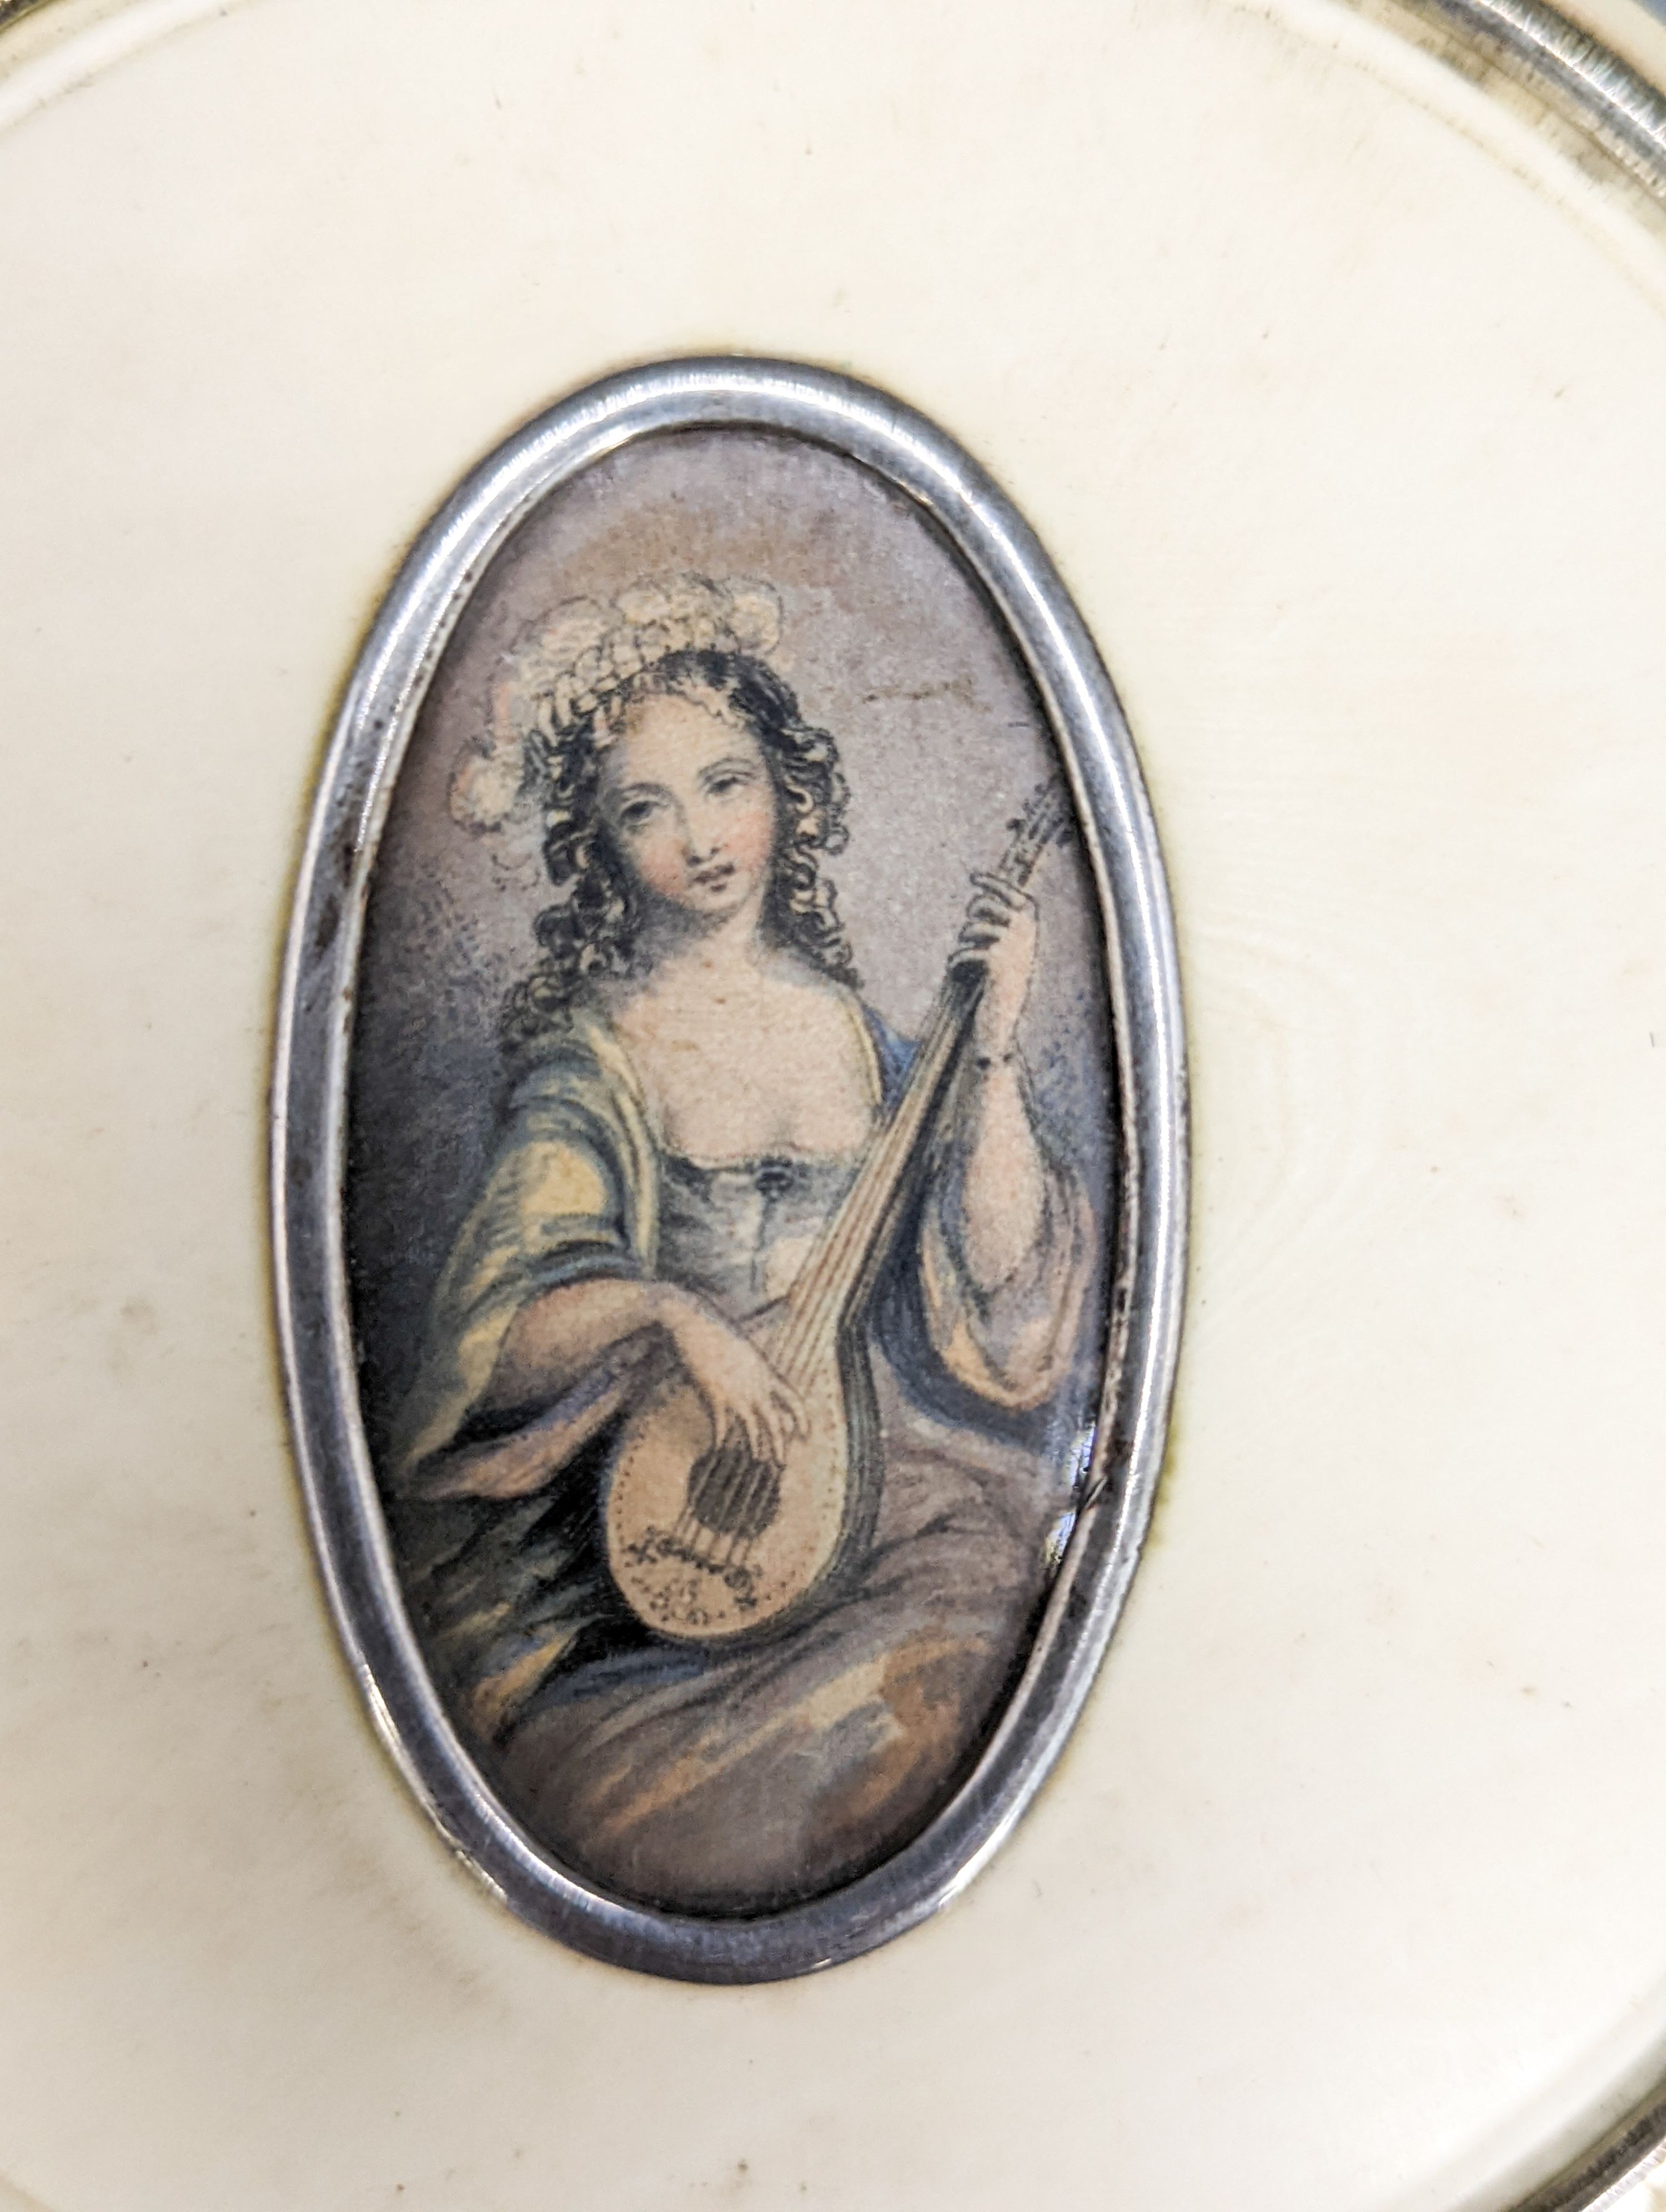 An early 19th century ivory circular box with central cartouche, a tortoiseshell match holder, diameter 9cm, and a pierced pot